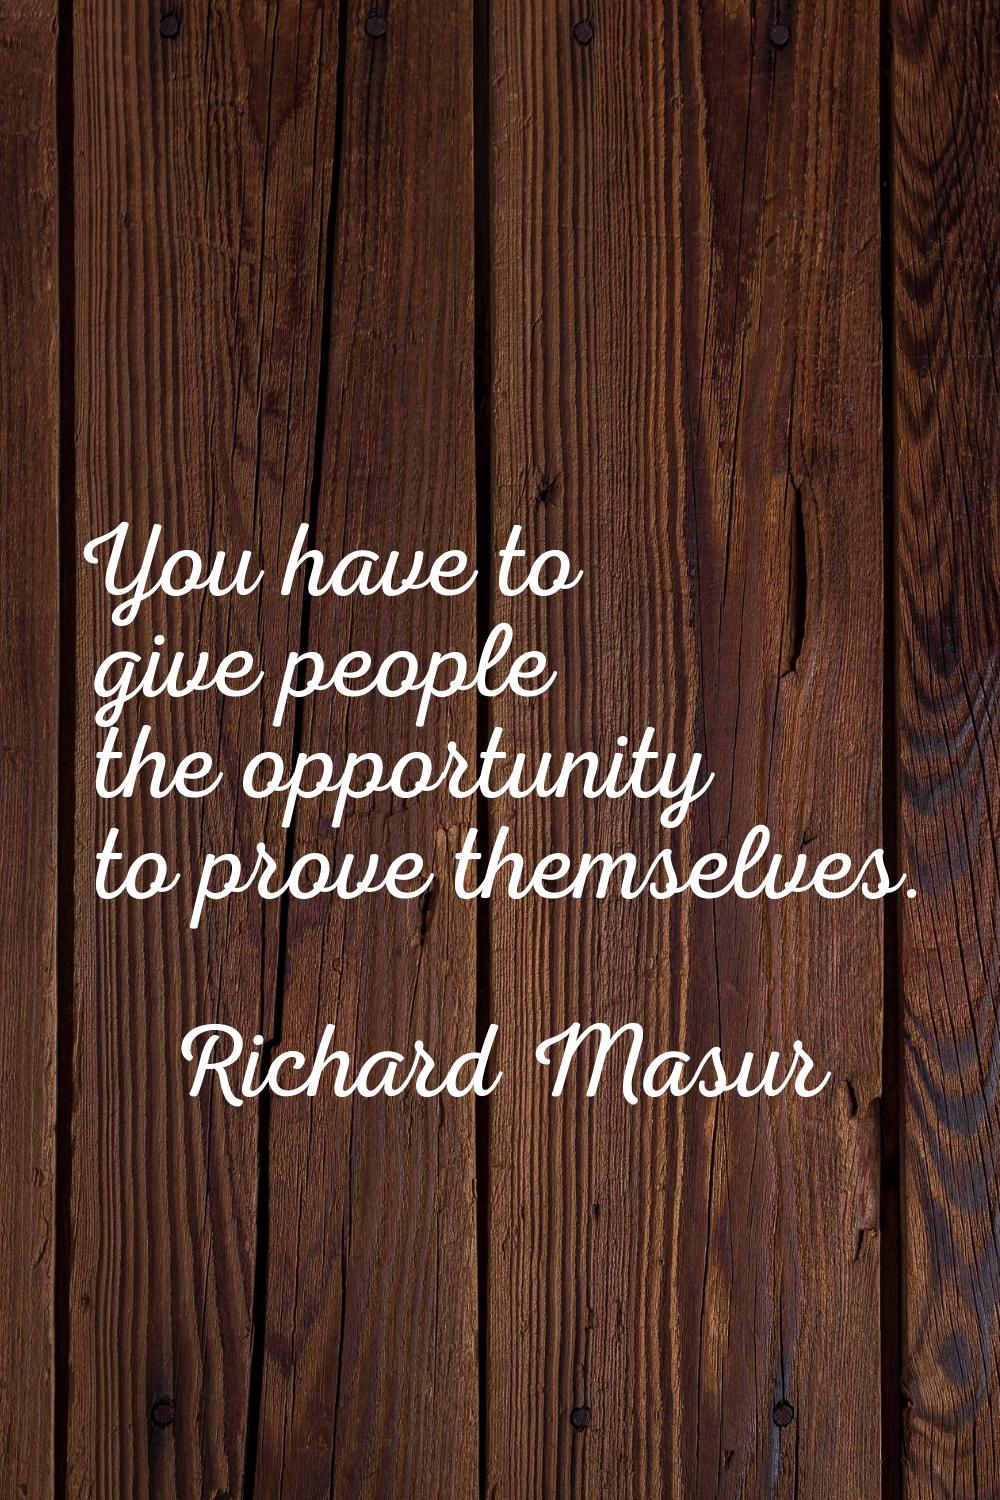 You have to give people the opportunity to prove themselves.